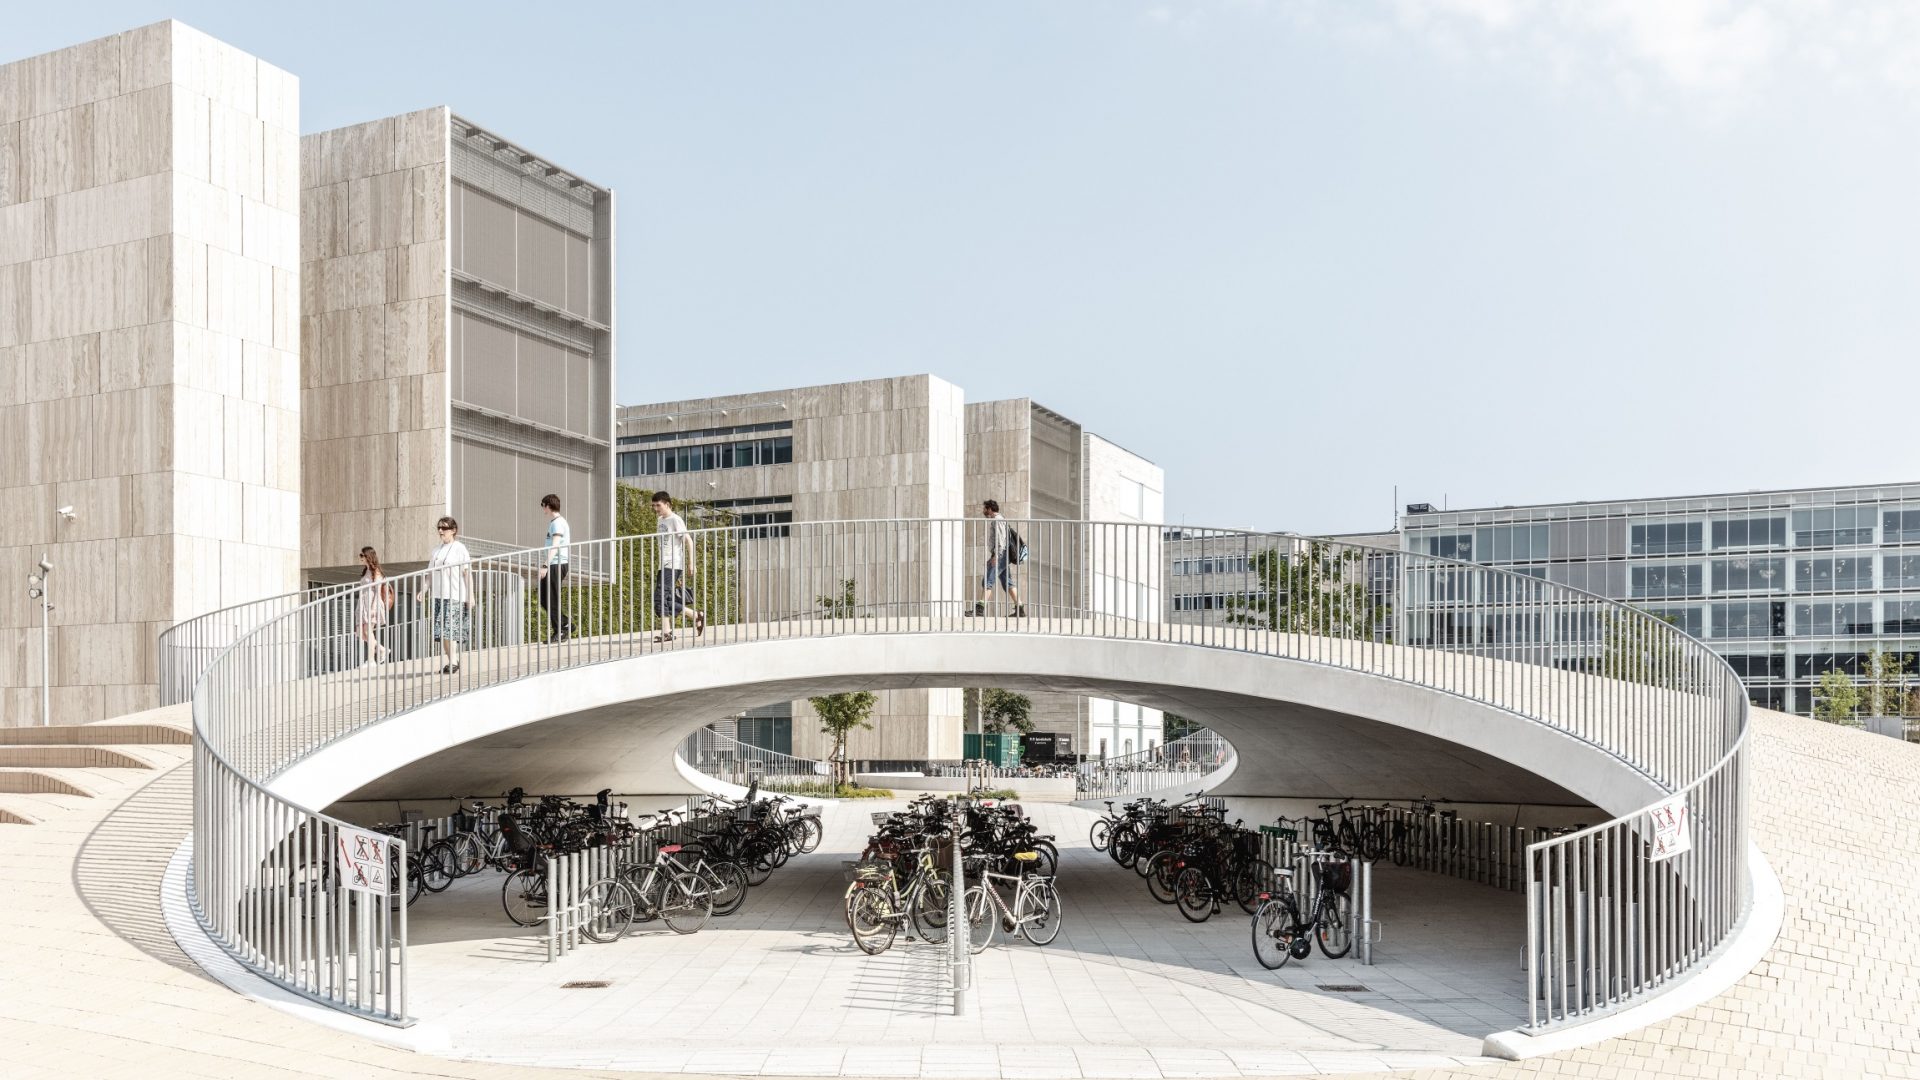 Karen Blixen Square, designed by Cobe and built in 2019, is one of the largest public squares in Copenhagen. It has a functional role, housing up to 2,000 bikes, as well as being a recreational resource. Photo: Rasmus Hjortshøj
